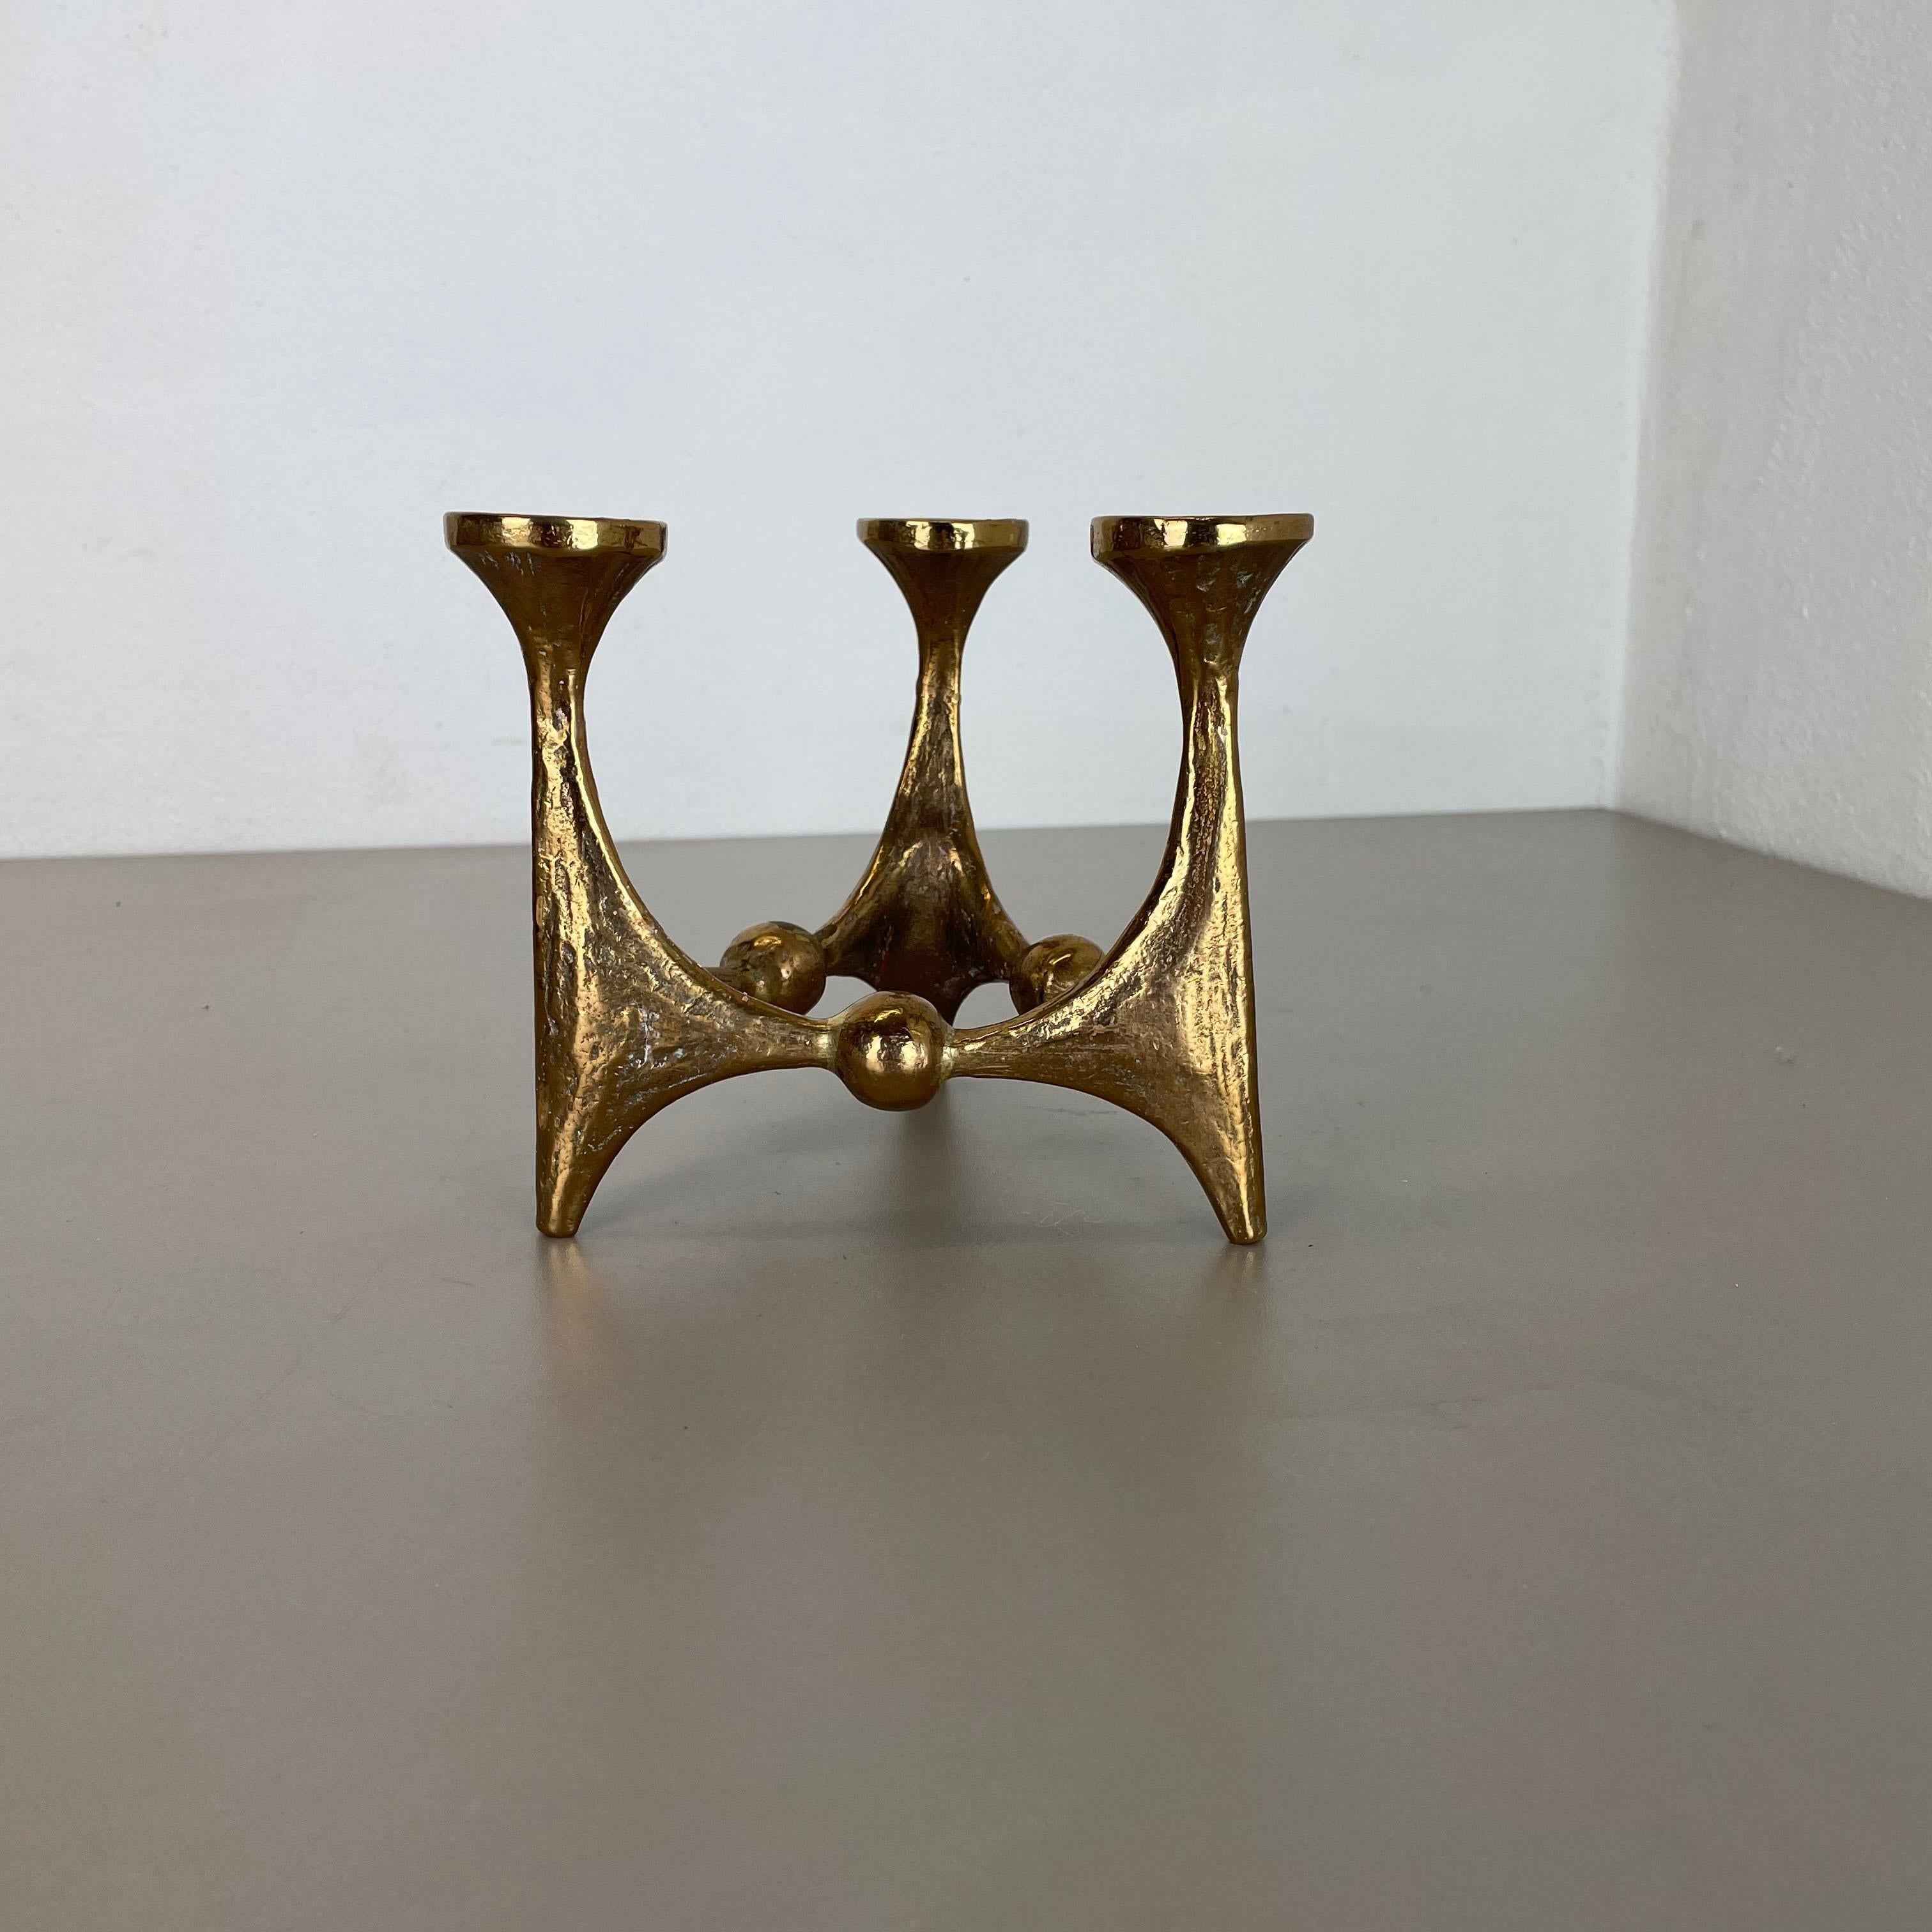 Article: Brutalist candleholder

Origin: Germany

Design producer: Michael Harjes

Material: bronze

Decade: 1960s

Description: This original vintage candleholder, was produced in the 1960s in Germany. Designed and executed by Michael